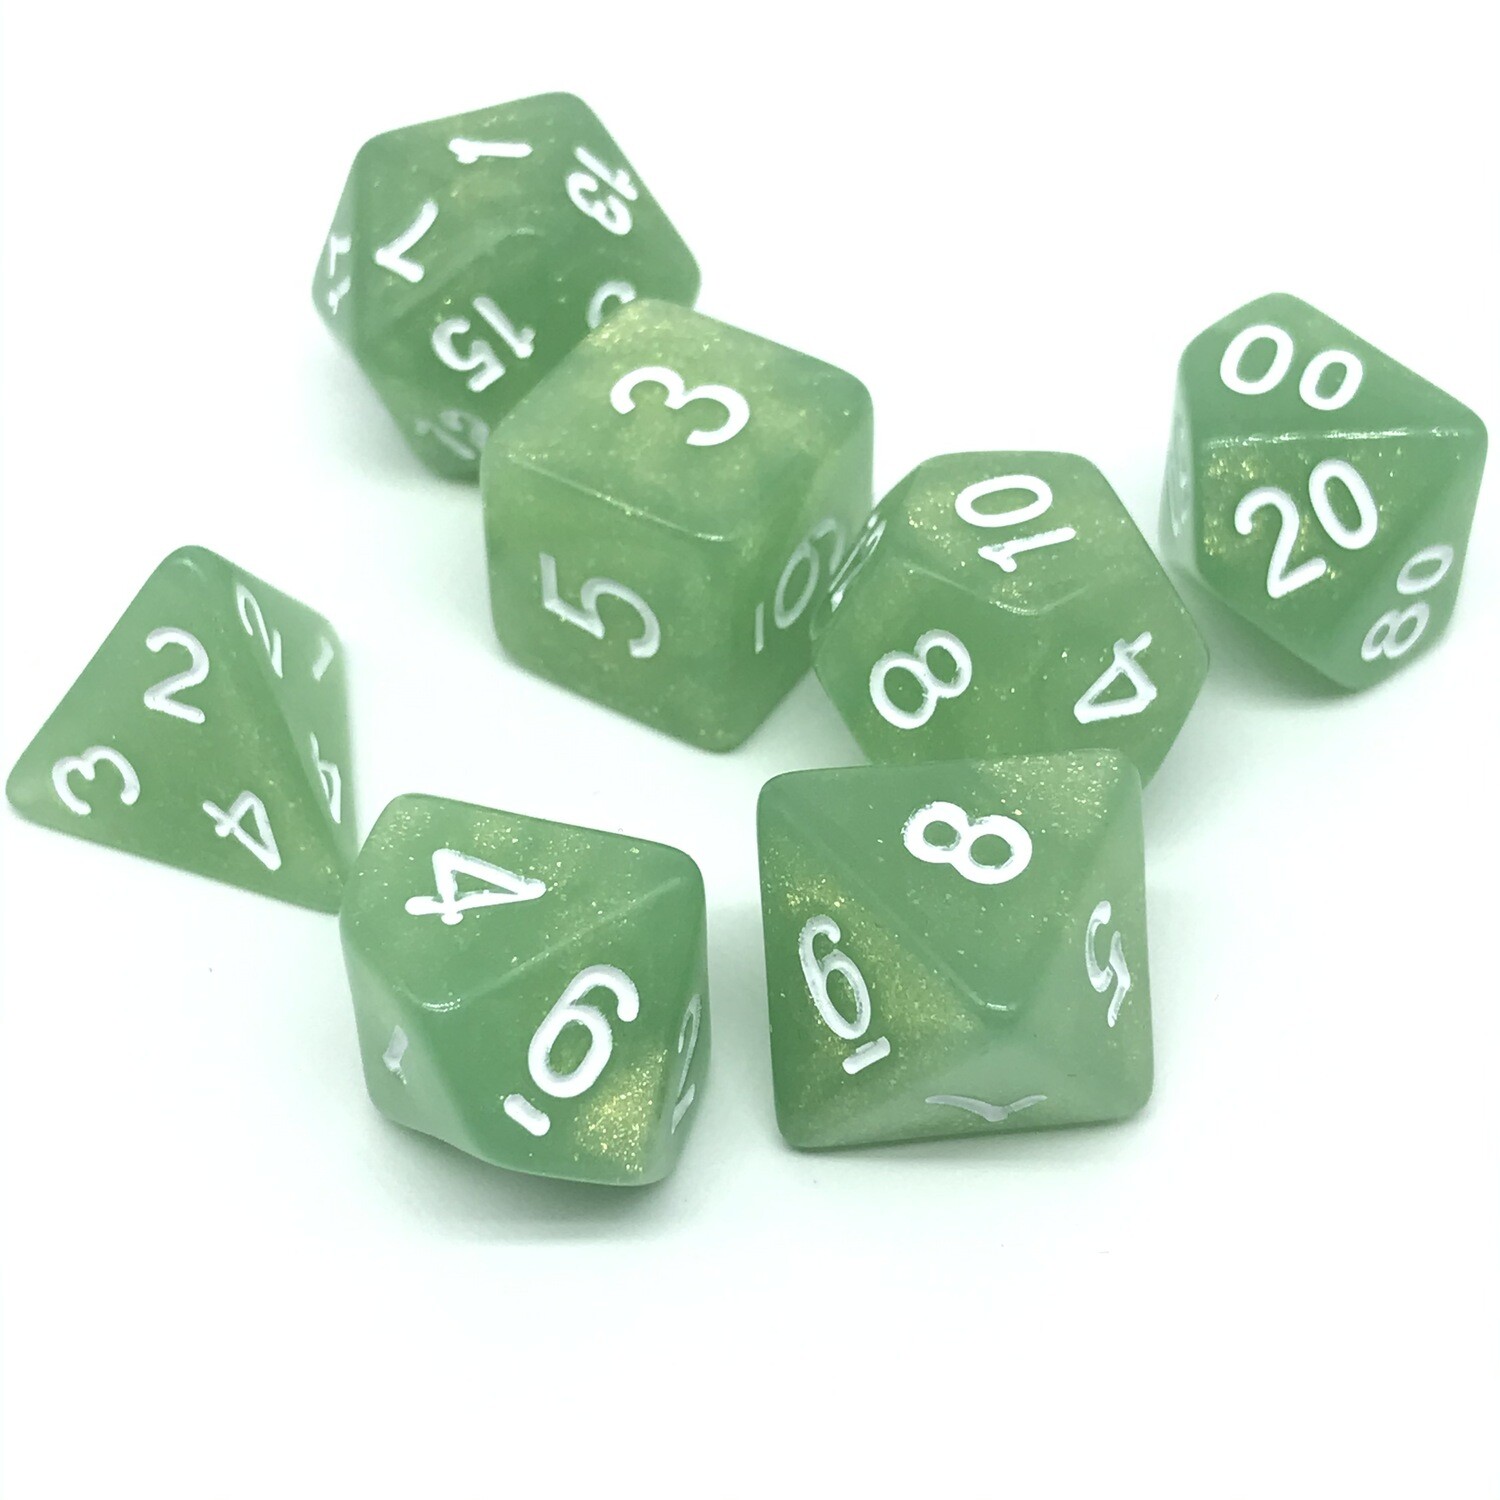 Dice Set - Green sparkly with white numbers